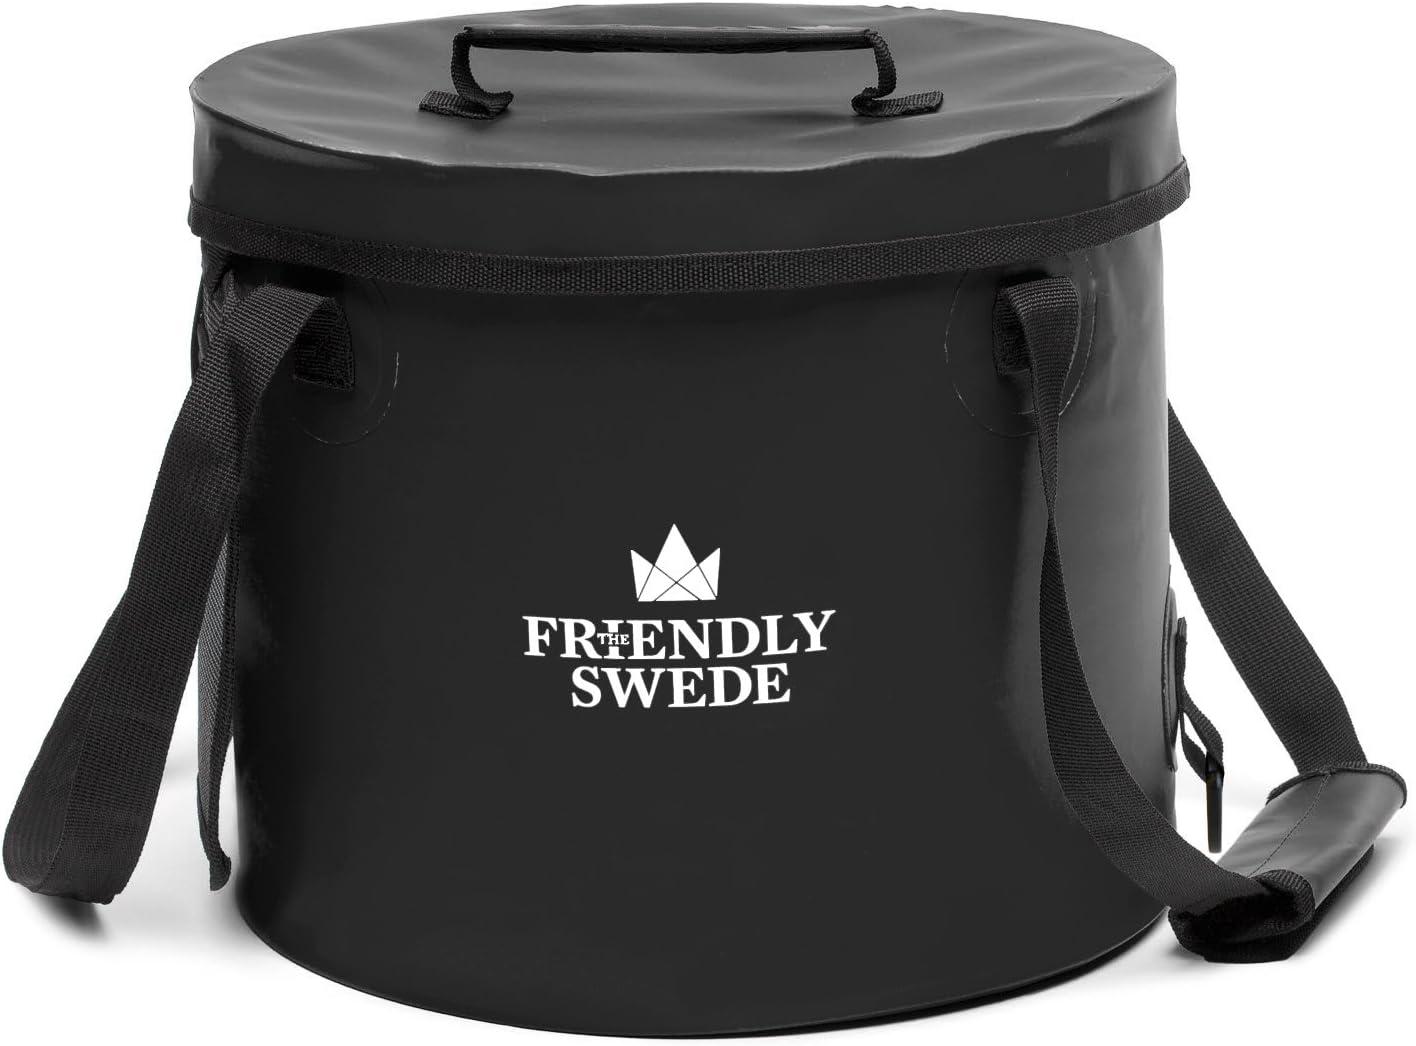 The Friendly Swede Collapsible Bucket with Lid, Folding Bucket for